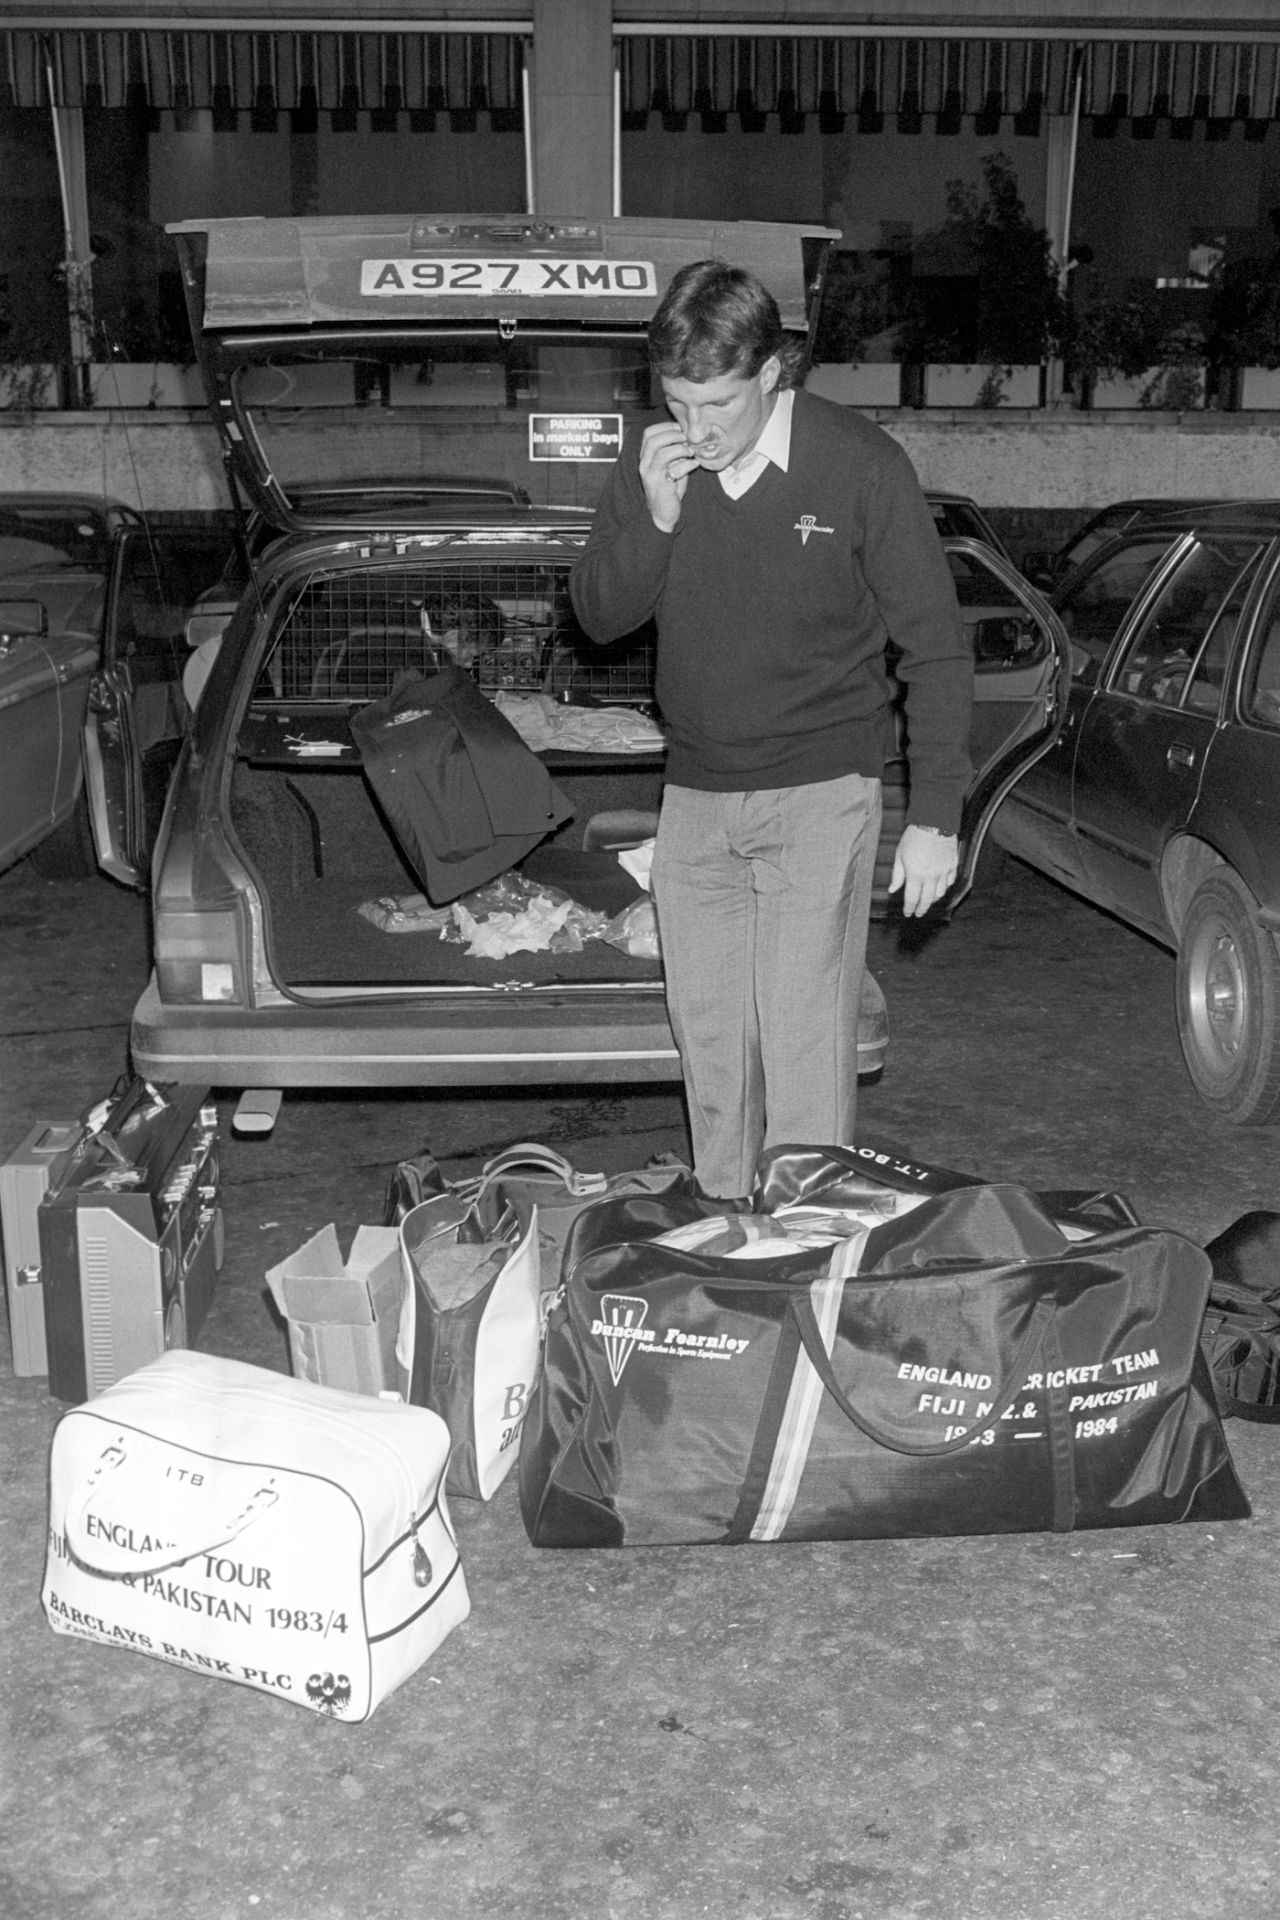 Ian Botham tries to figure out a way to pack all his bags in his small car prior to departing for the tour, Dec 28, 1983